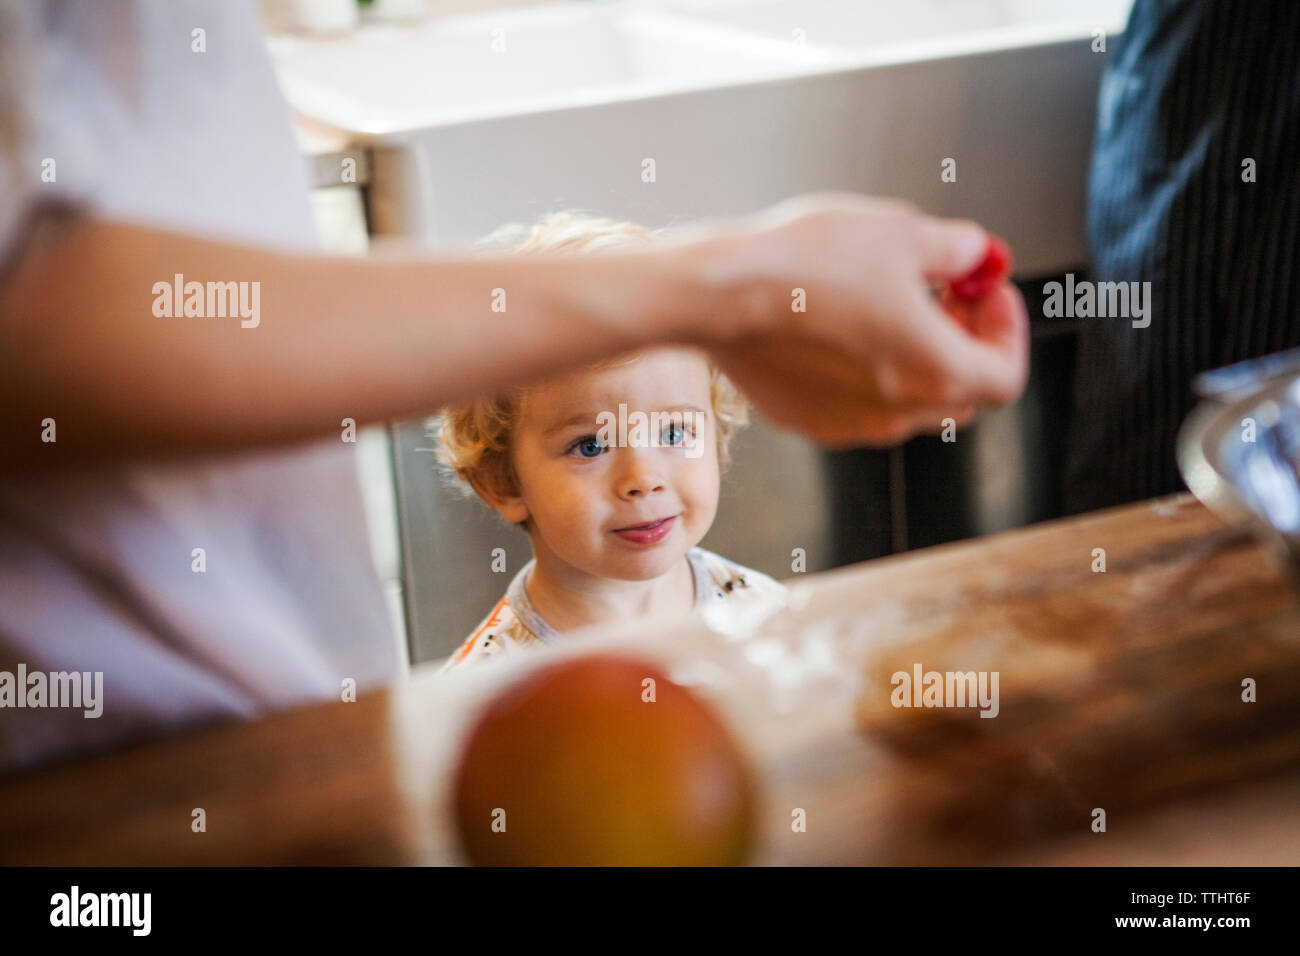 Boy looking at raspberry in kitchen Stock Photo